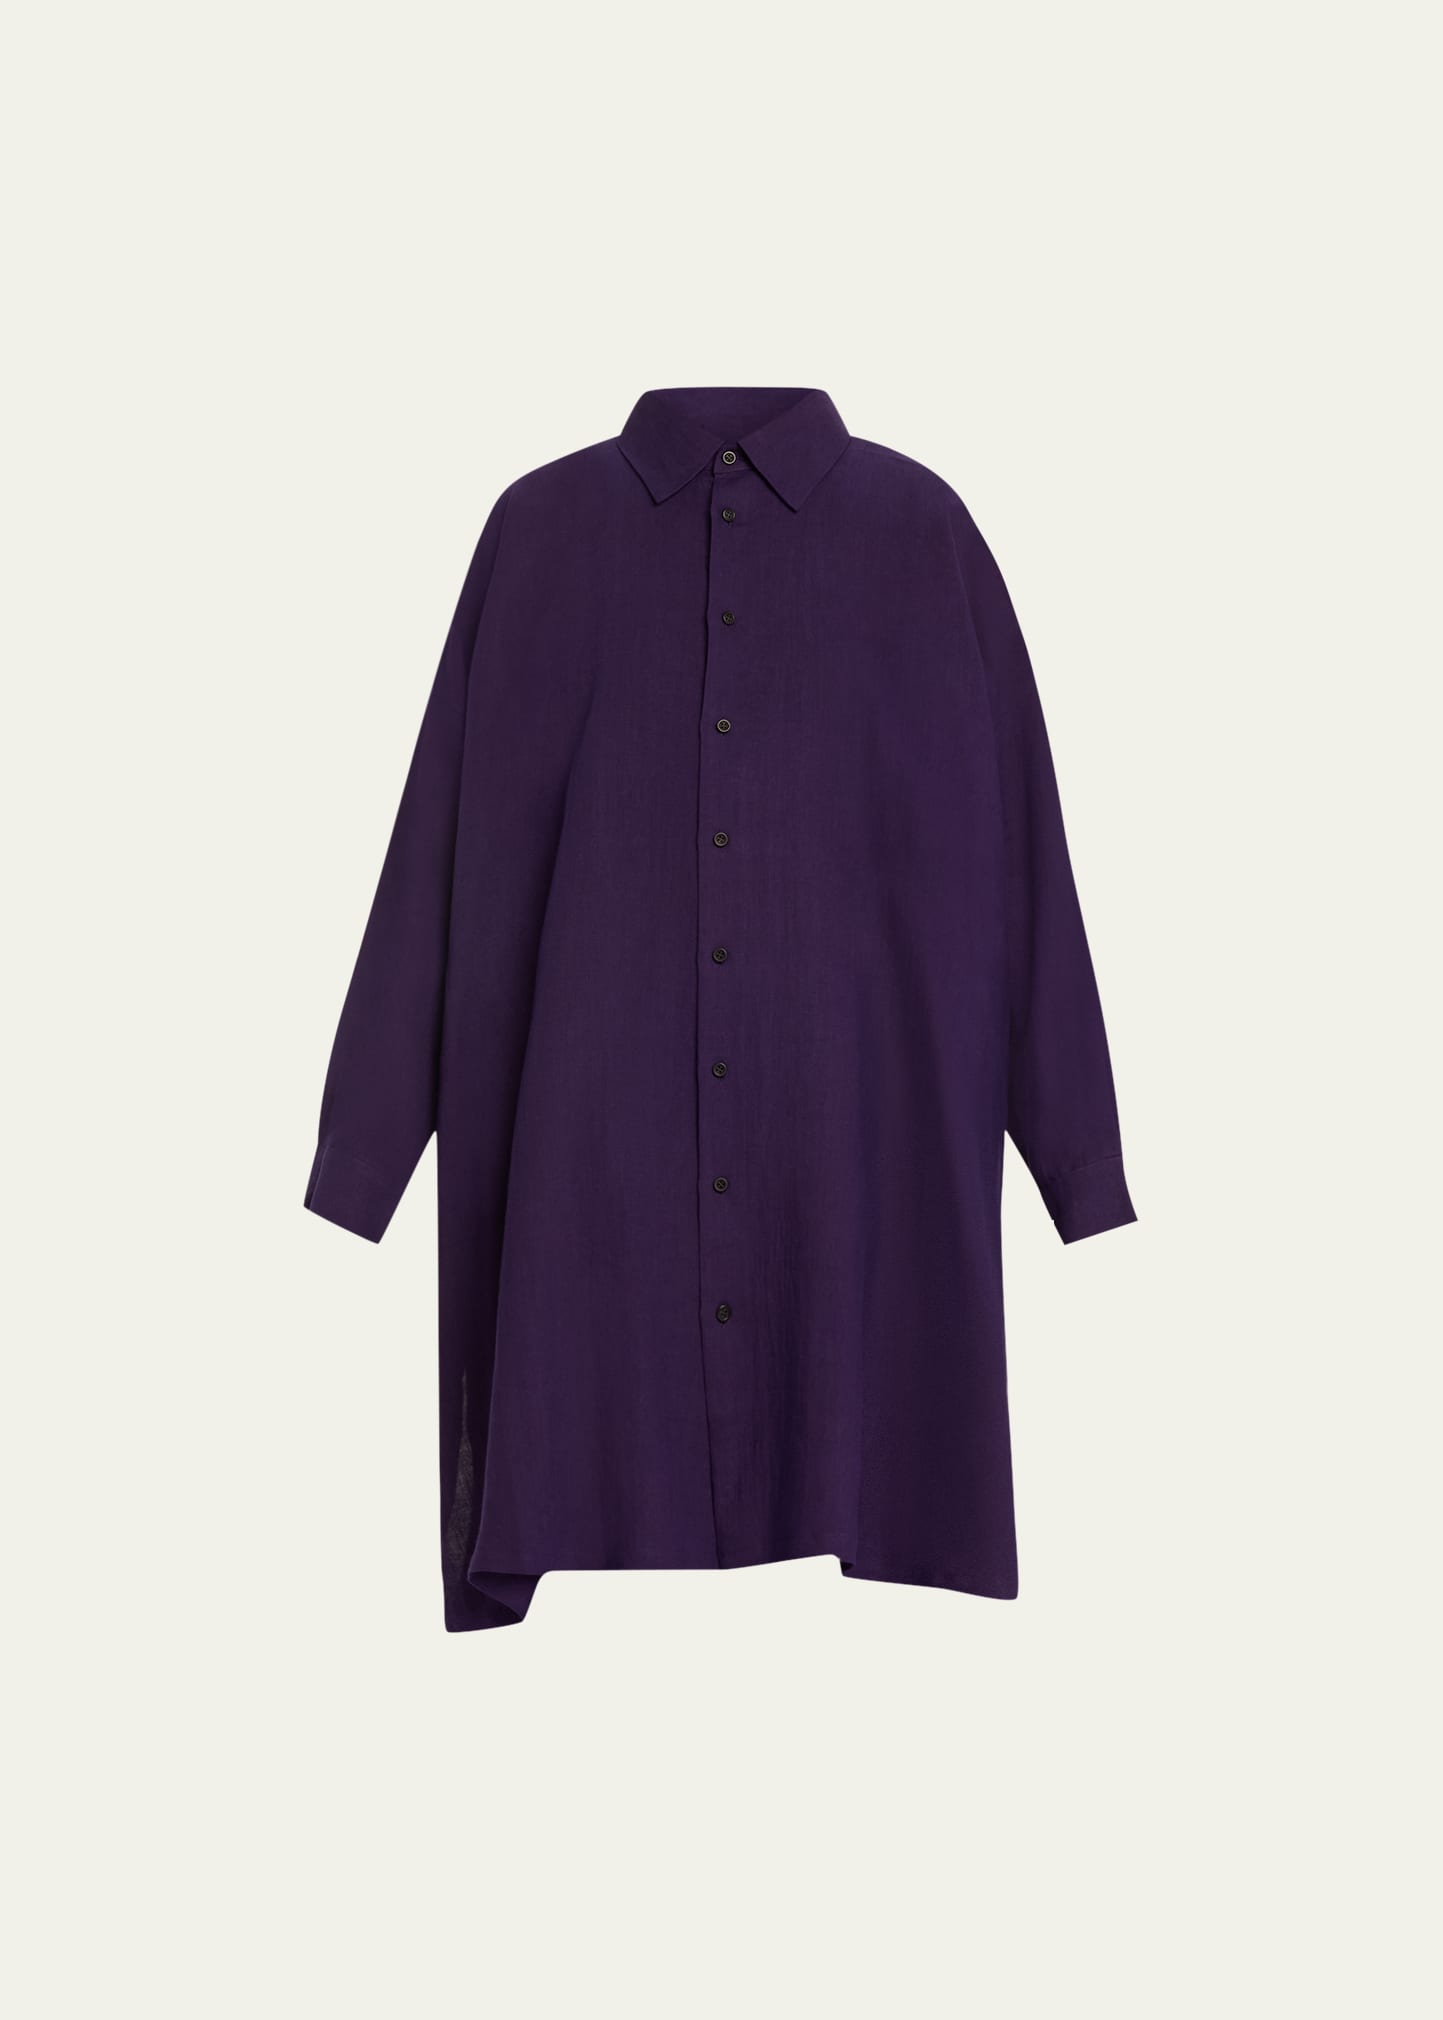 Wide A-Line Shirt With Collar (Very Long Length) With Slits